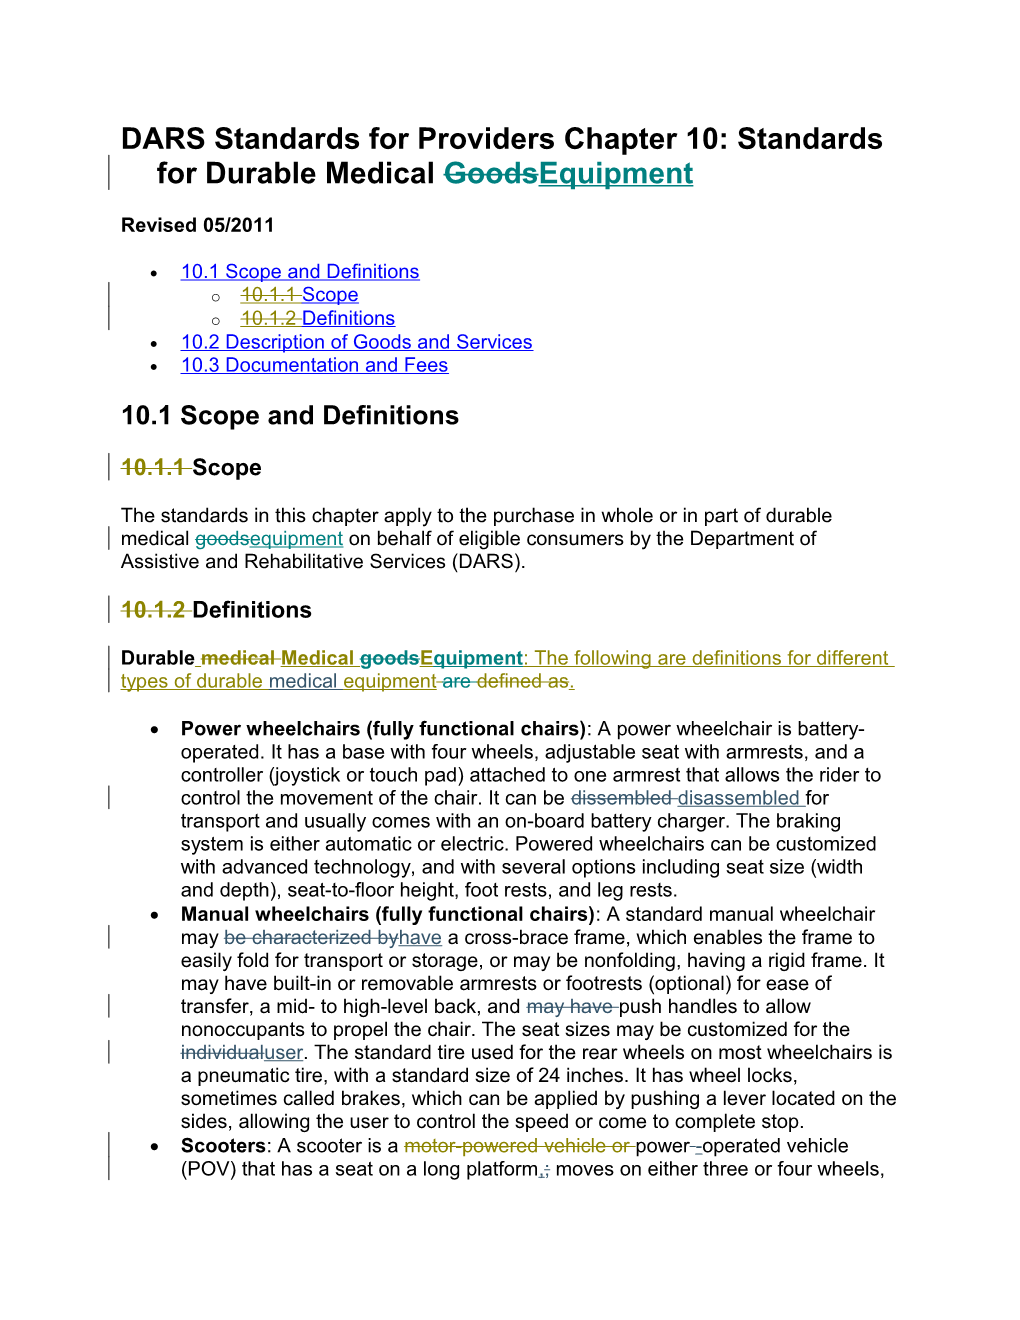 DARS DRS Standards For Providers Chapter 10 Revisions - May 2011